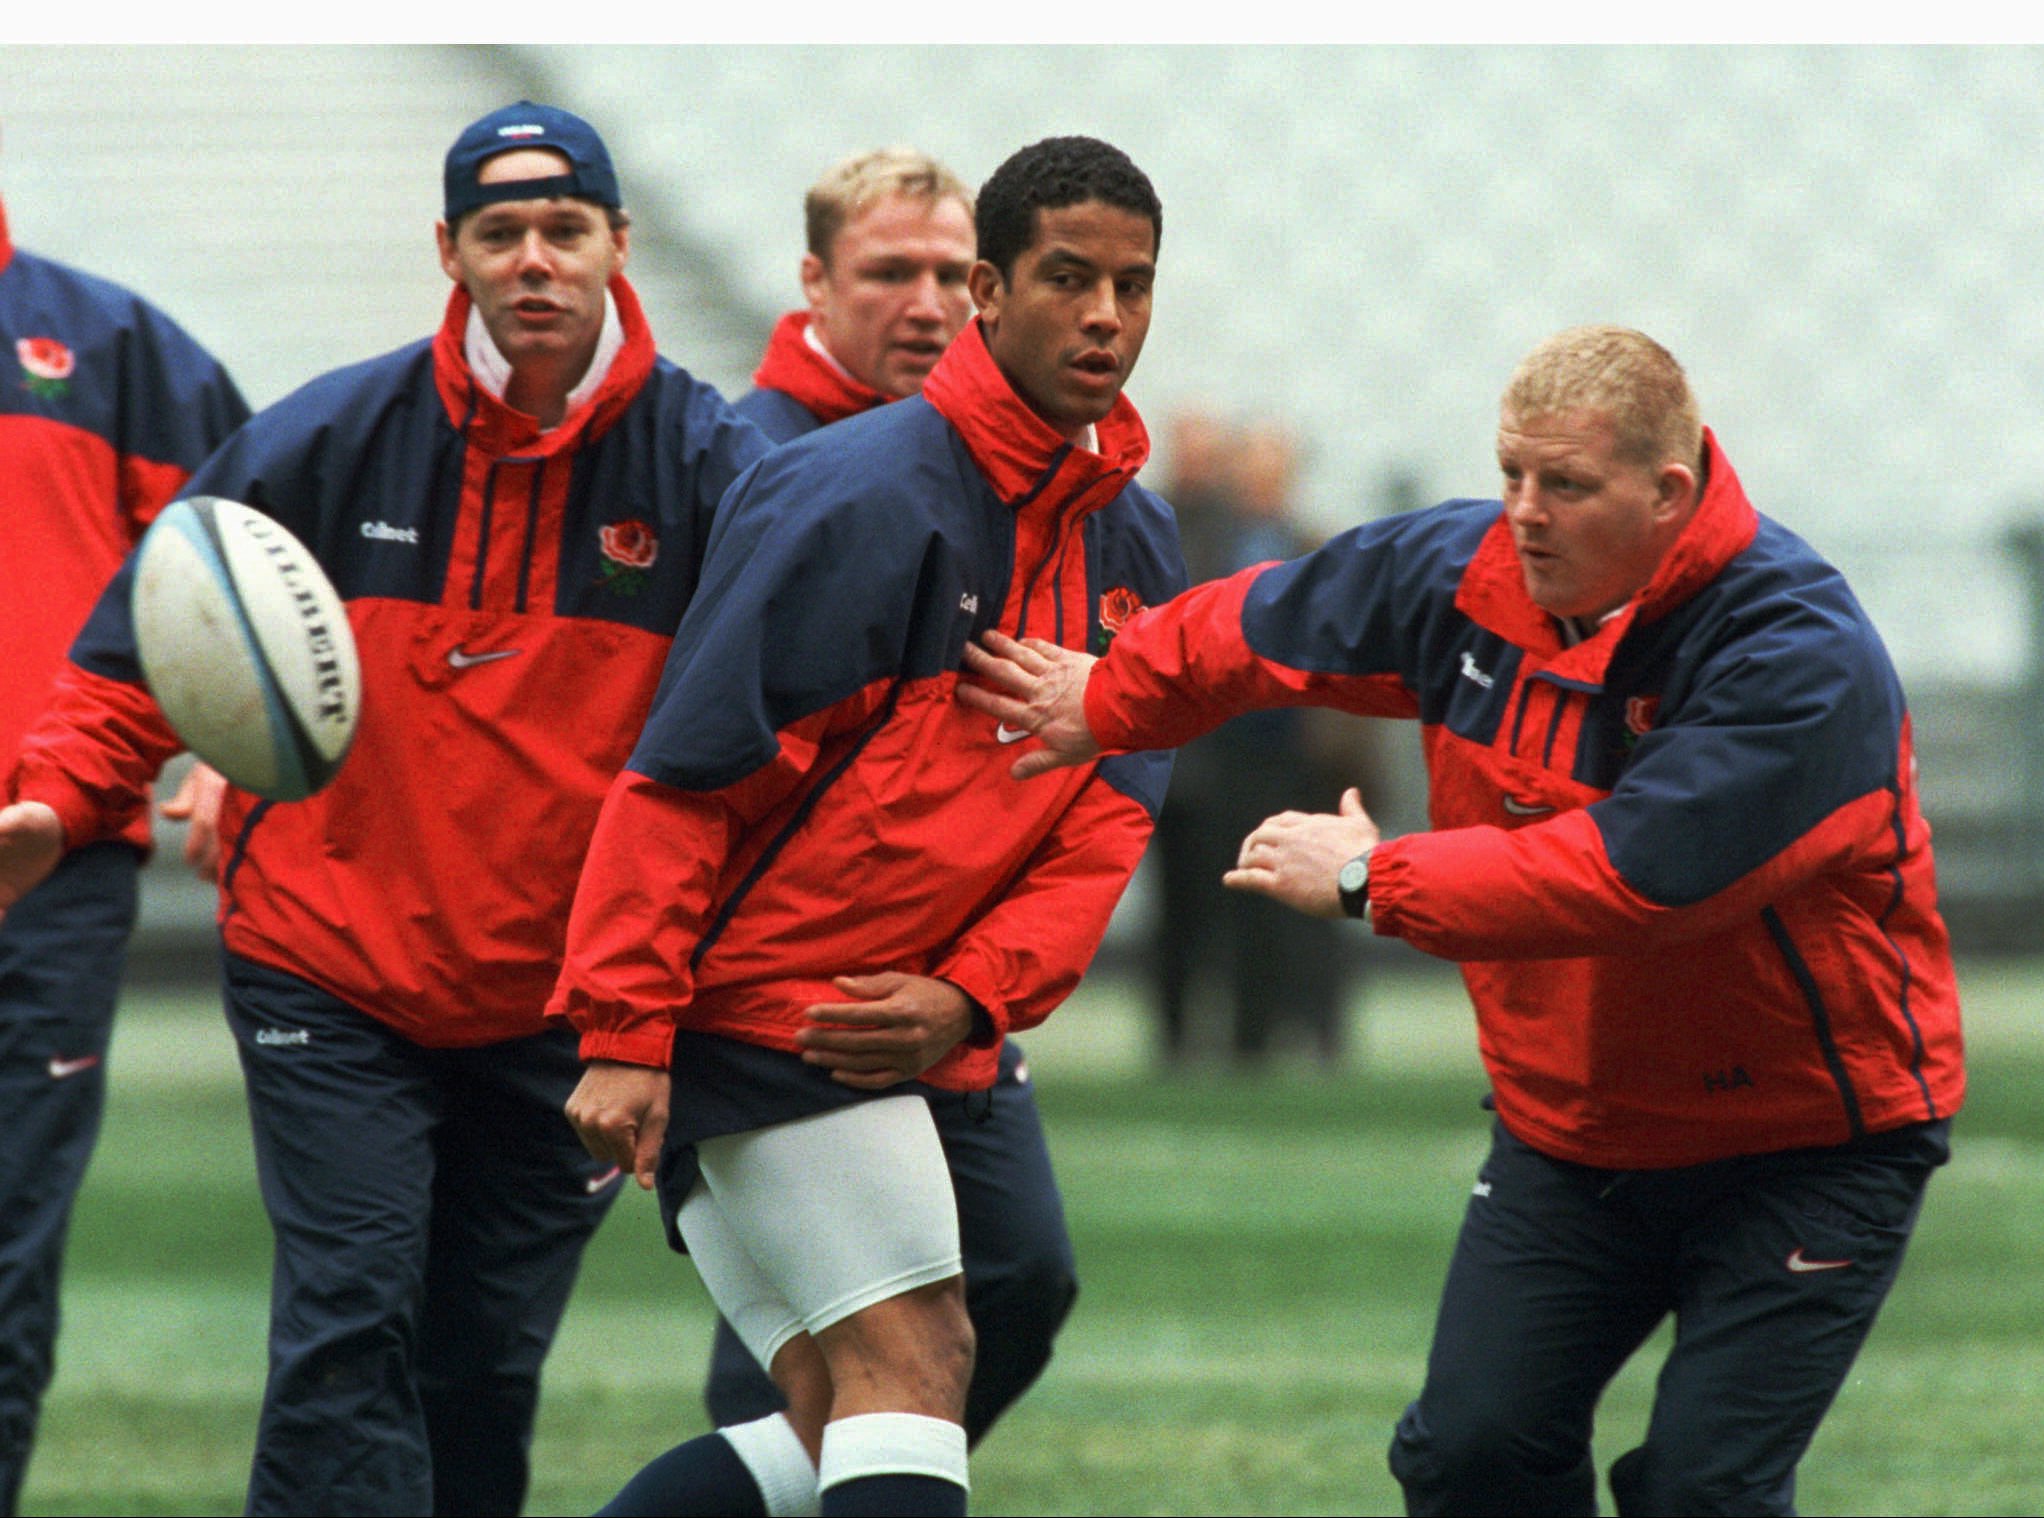 Jeremy Guscott (centre) with the England side in 1998. The squad was then coached by Clive Woodward (left). Photo: Reuters